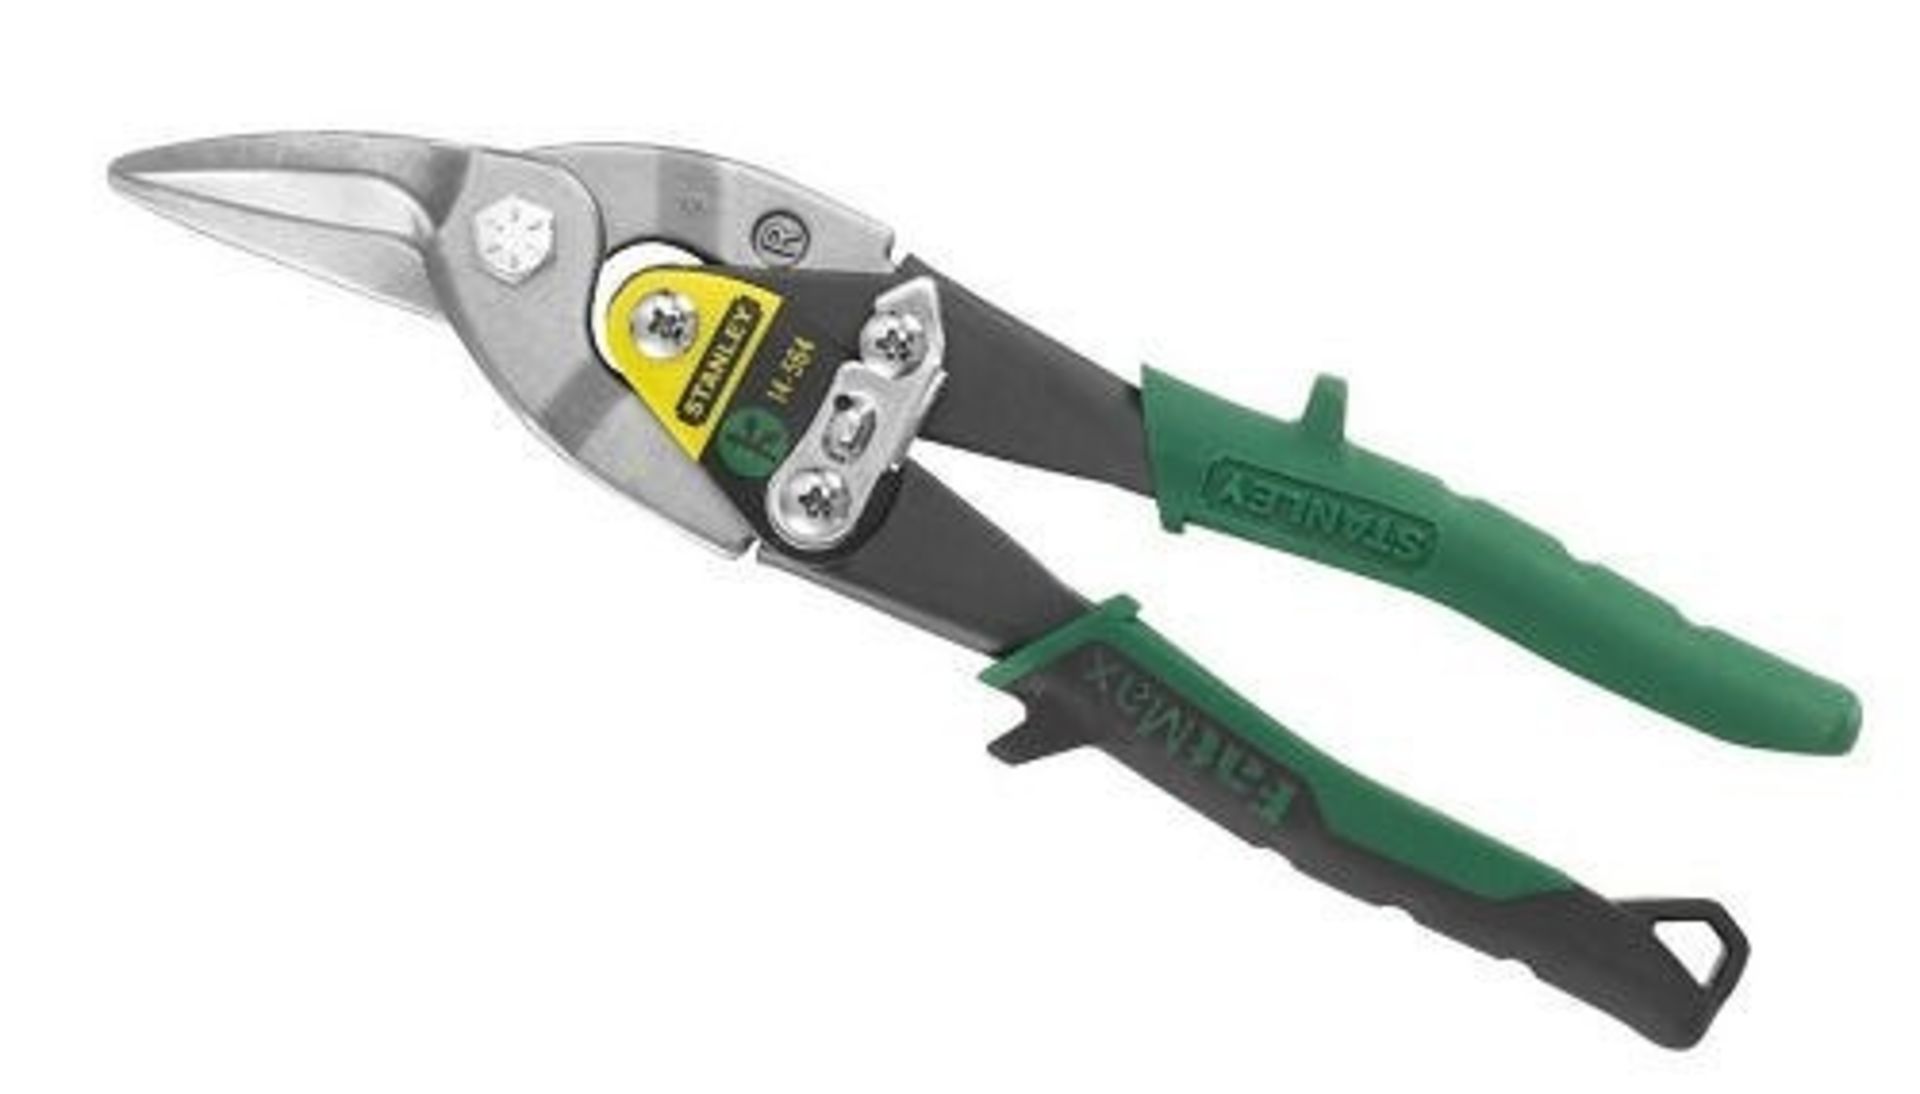 12x BRAND NEW Stanley 2-14-564 FatMax Aviation Snips Right Hand Cut. RRP £17.99 EACH. (S2-5)